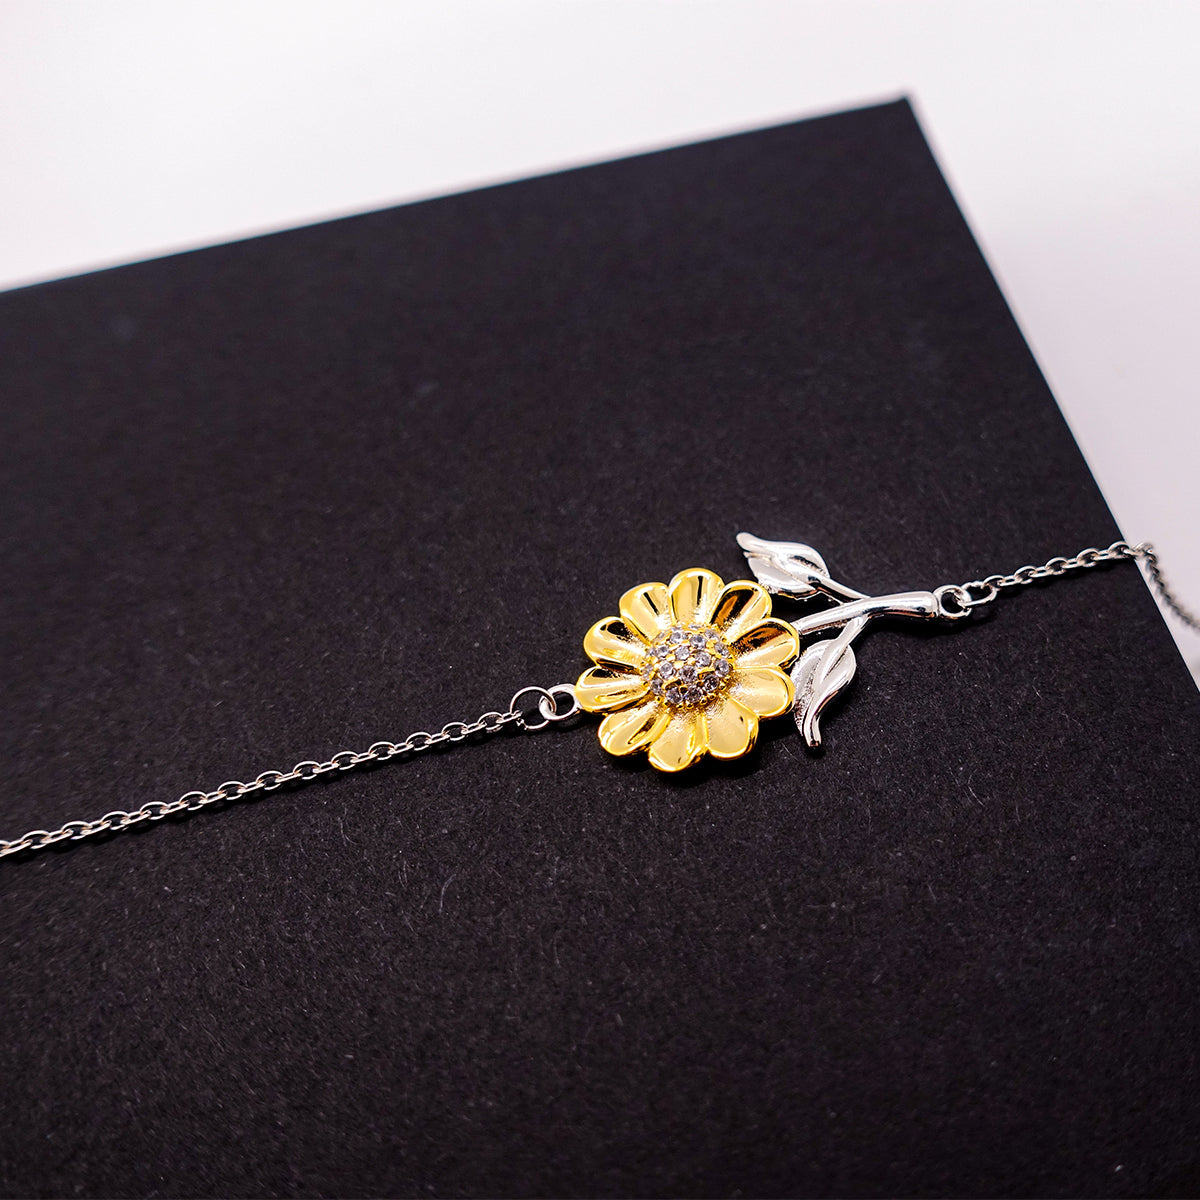 Abuela Sunflower Bracelet - Always in My Heart Engraved Gift for Grandma on Mothers Day, Christmas, Birthday - Unique Handmade Jewelry to Show Love, Appreciation and Gratitude